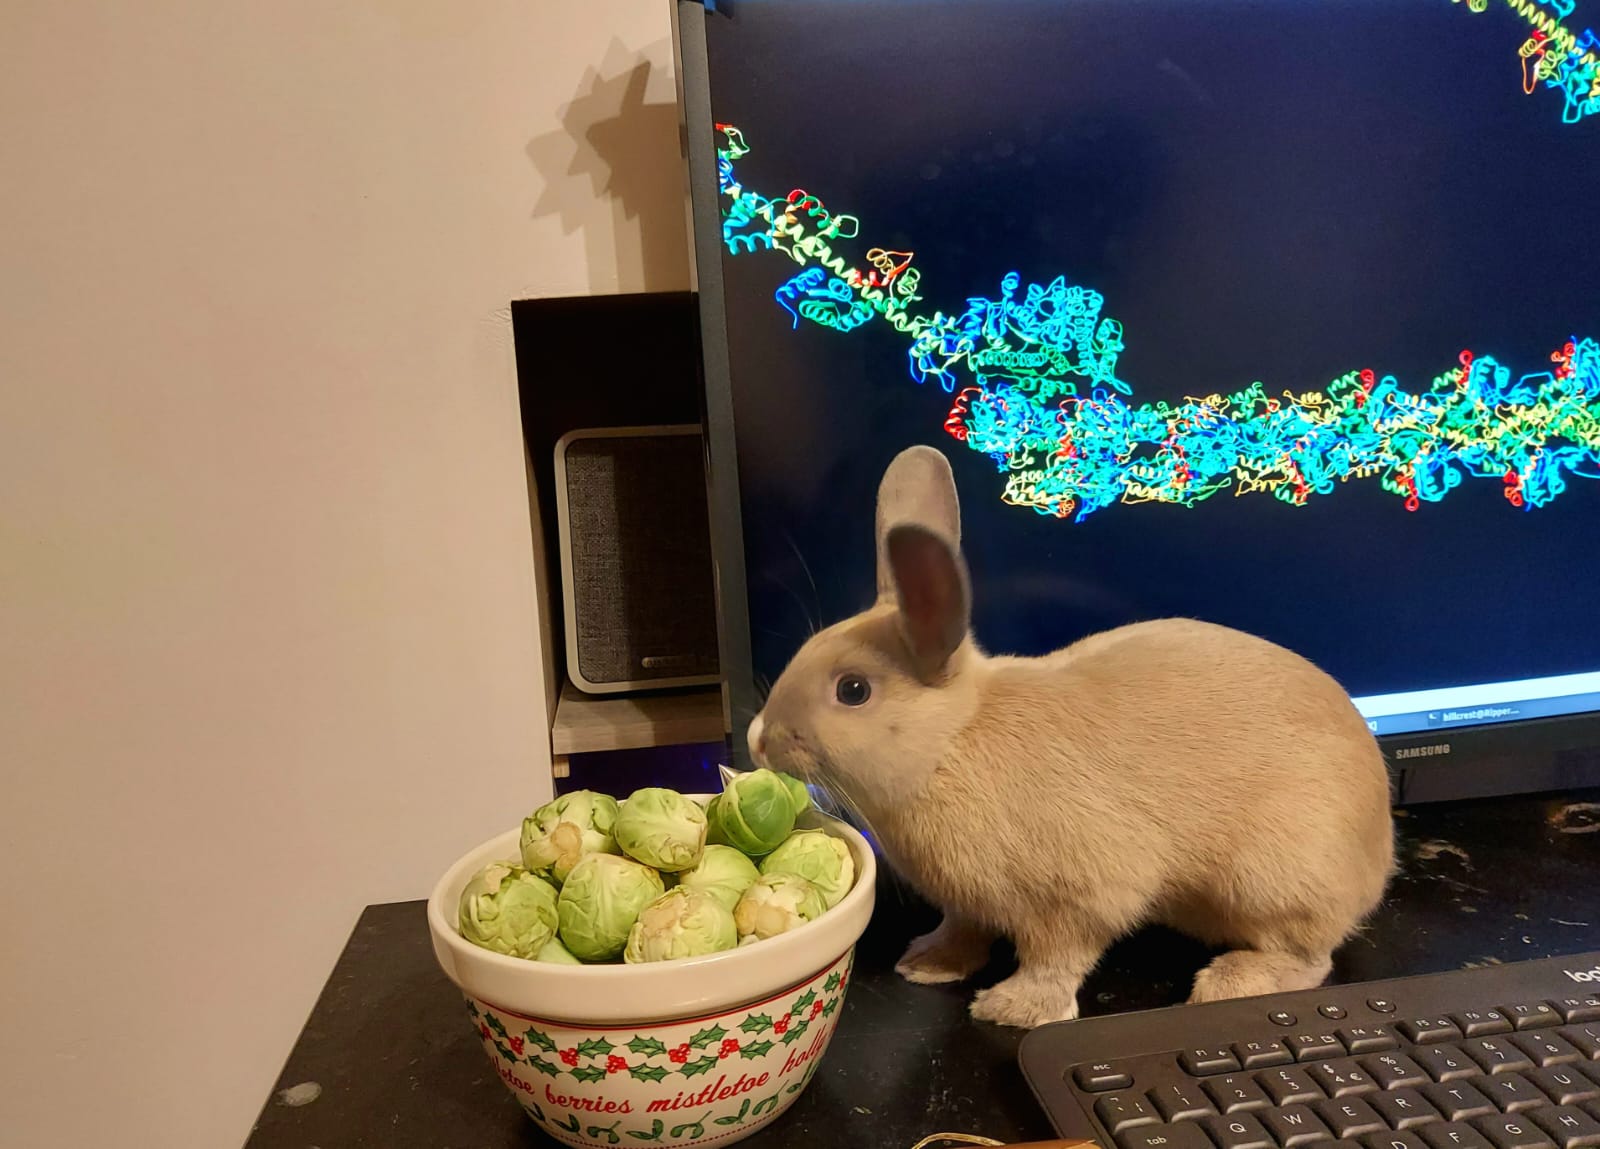 A baby grey rabbit sits infront of a bowl of brussel sprouts on a desk whilst a model of the motor protein myosin is shown on a computer screen behind it.